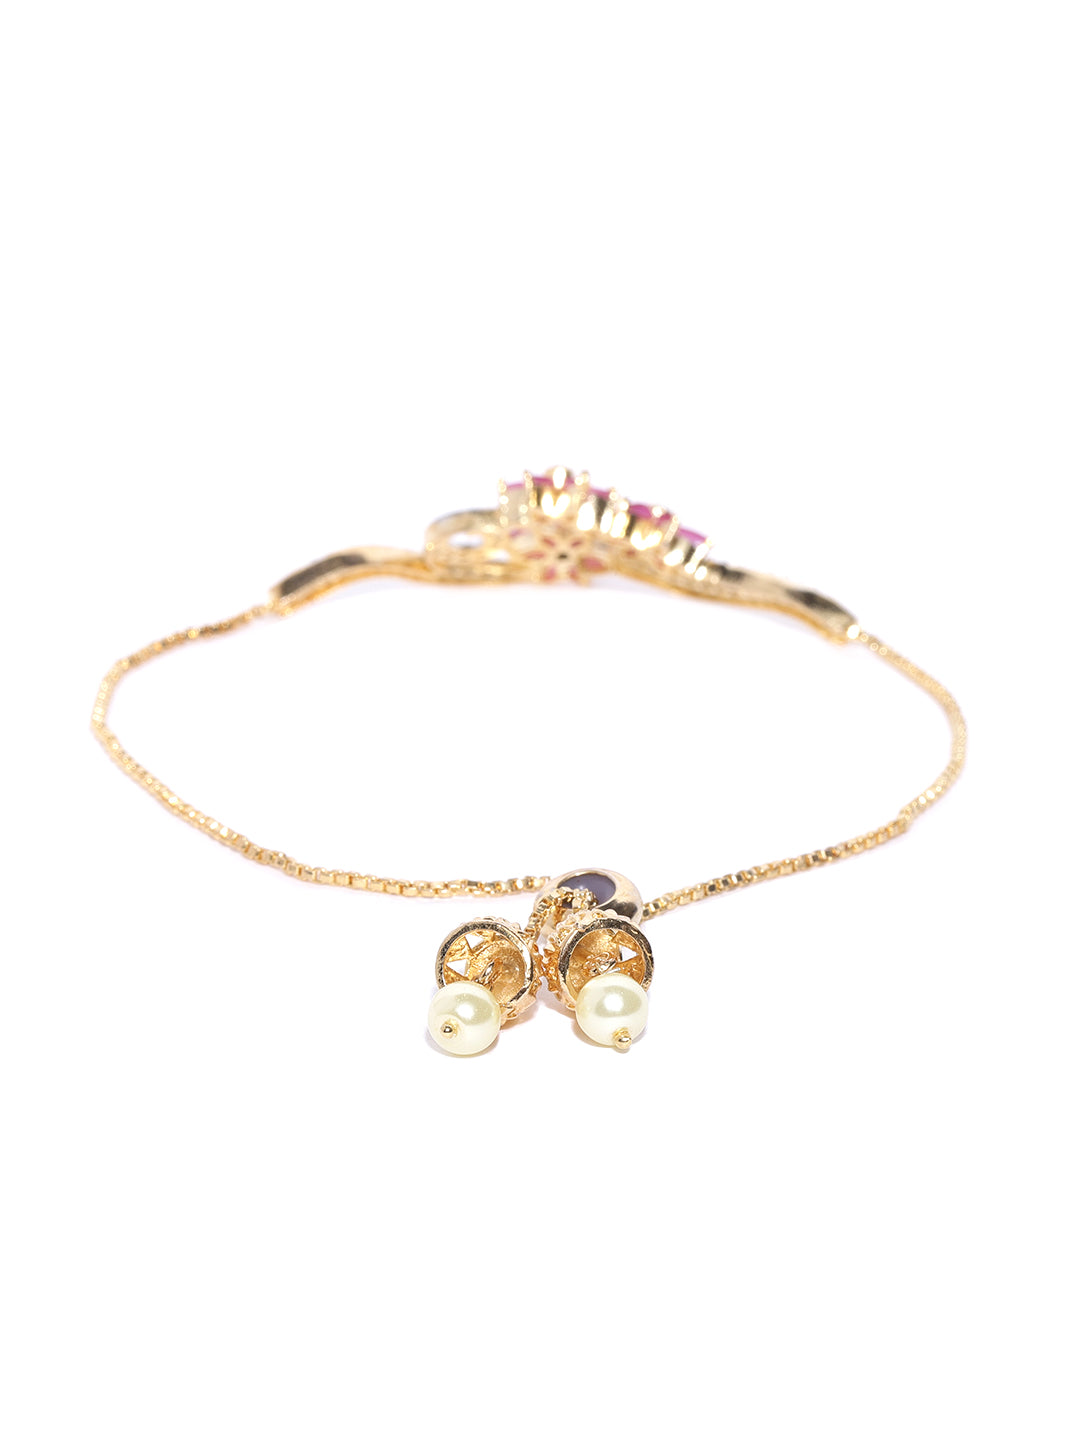 Priyaasi American Diamond and Ruby Studded Floral Patterned Link Bracelet in Magenta Color